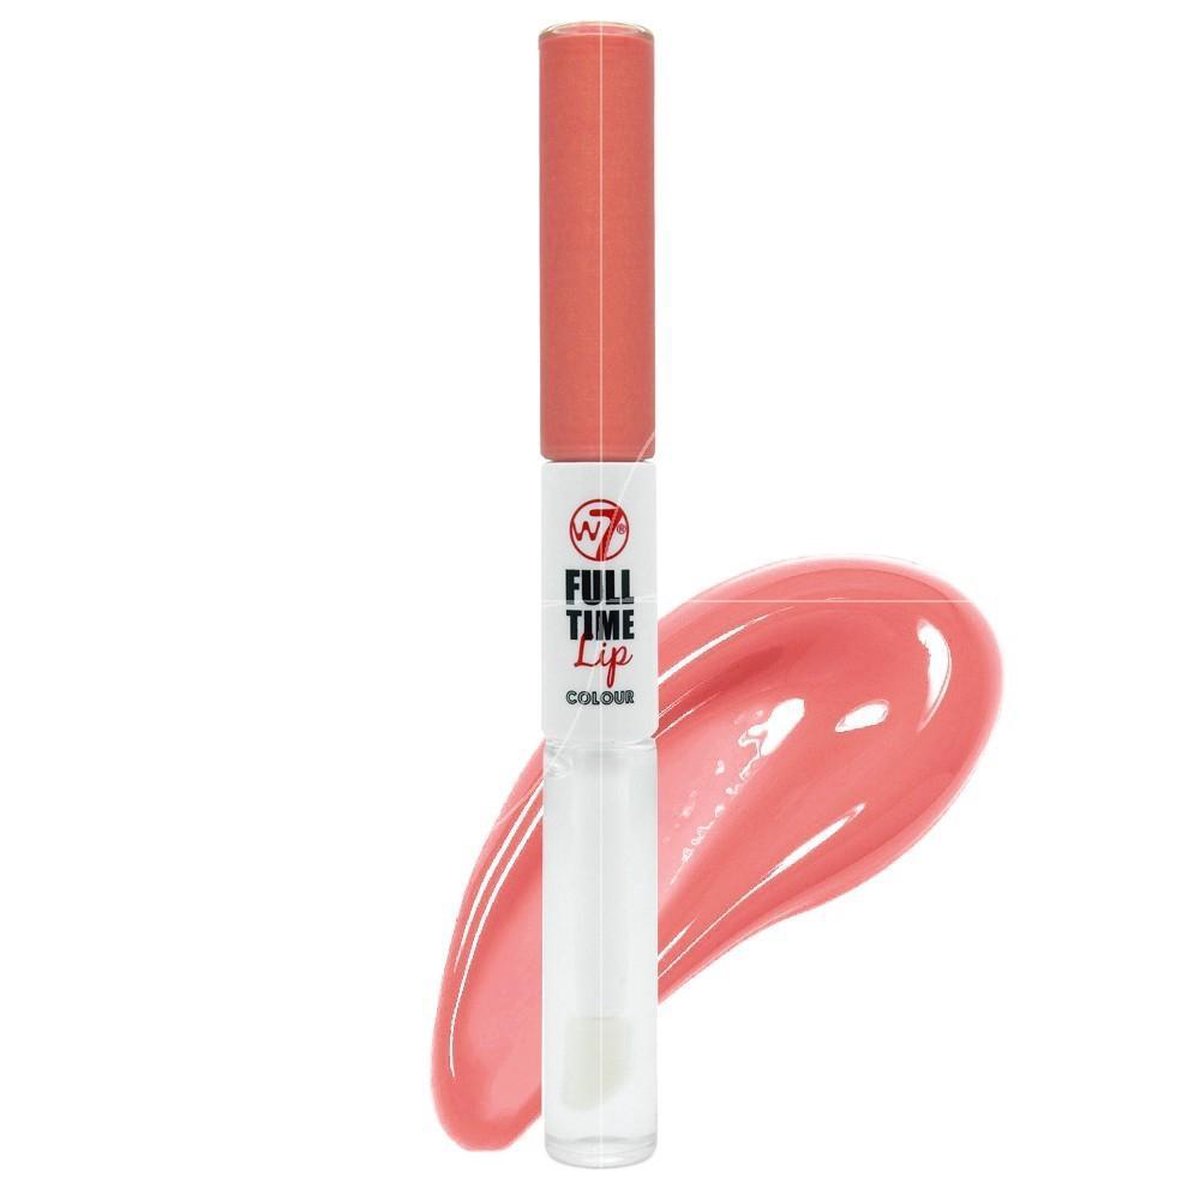 W7 Full Time Lipstick - On Trend